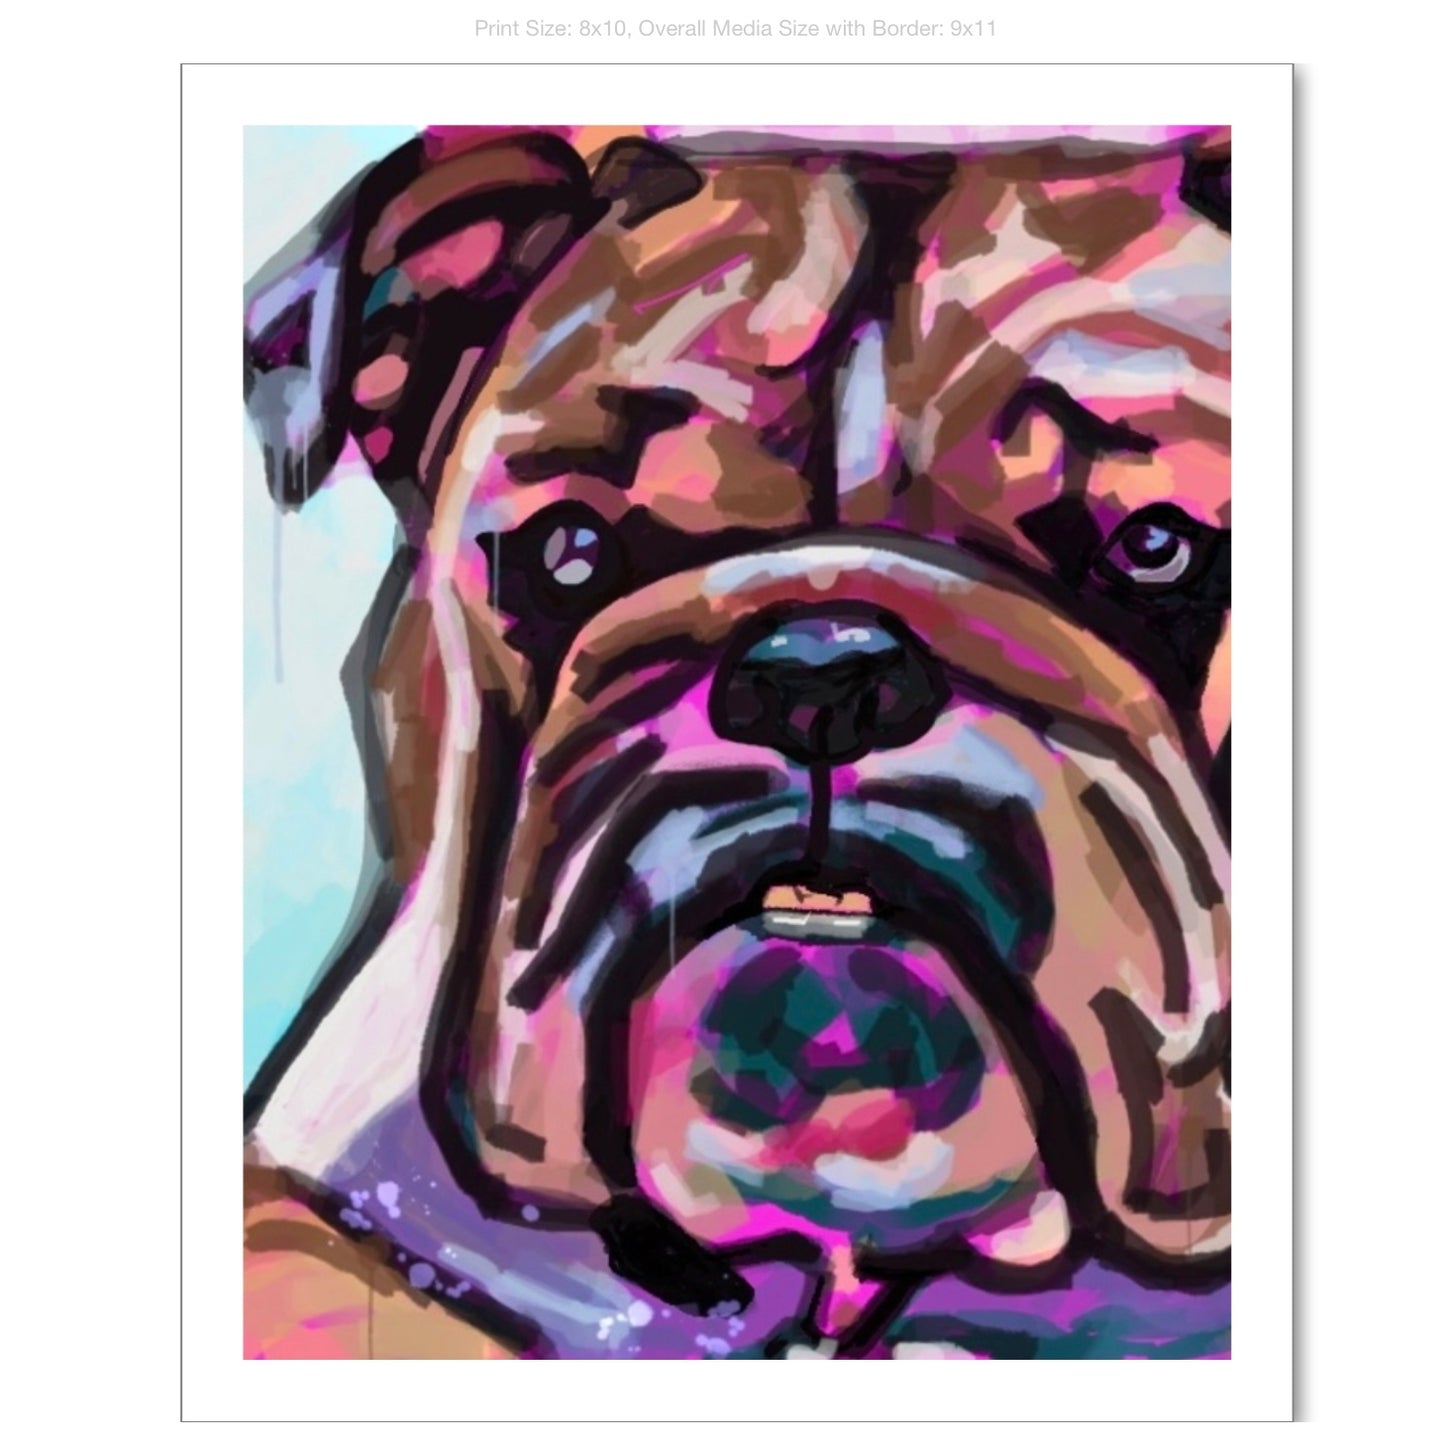 Bully Giclee on Premium Heavyweight Paper